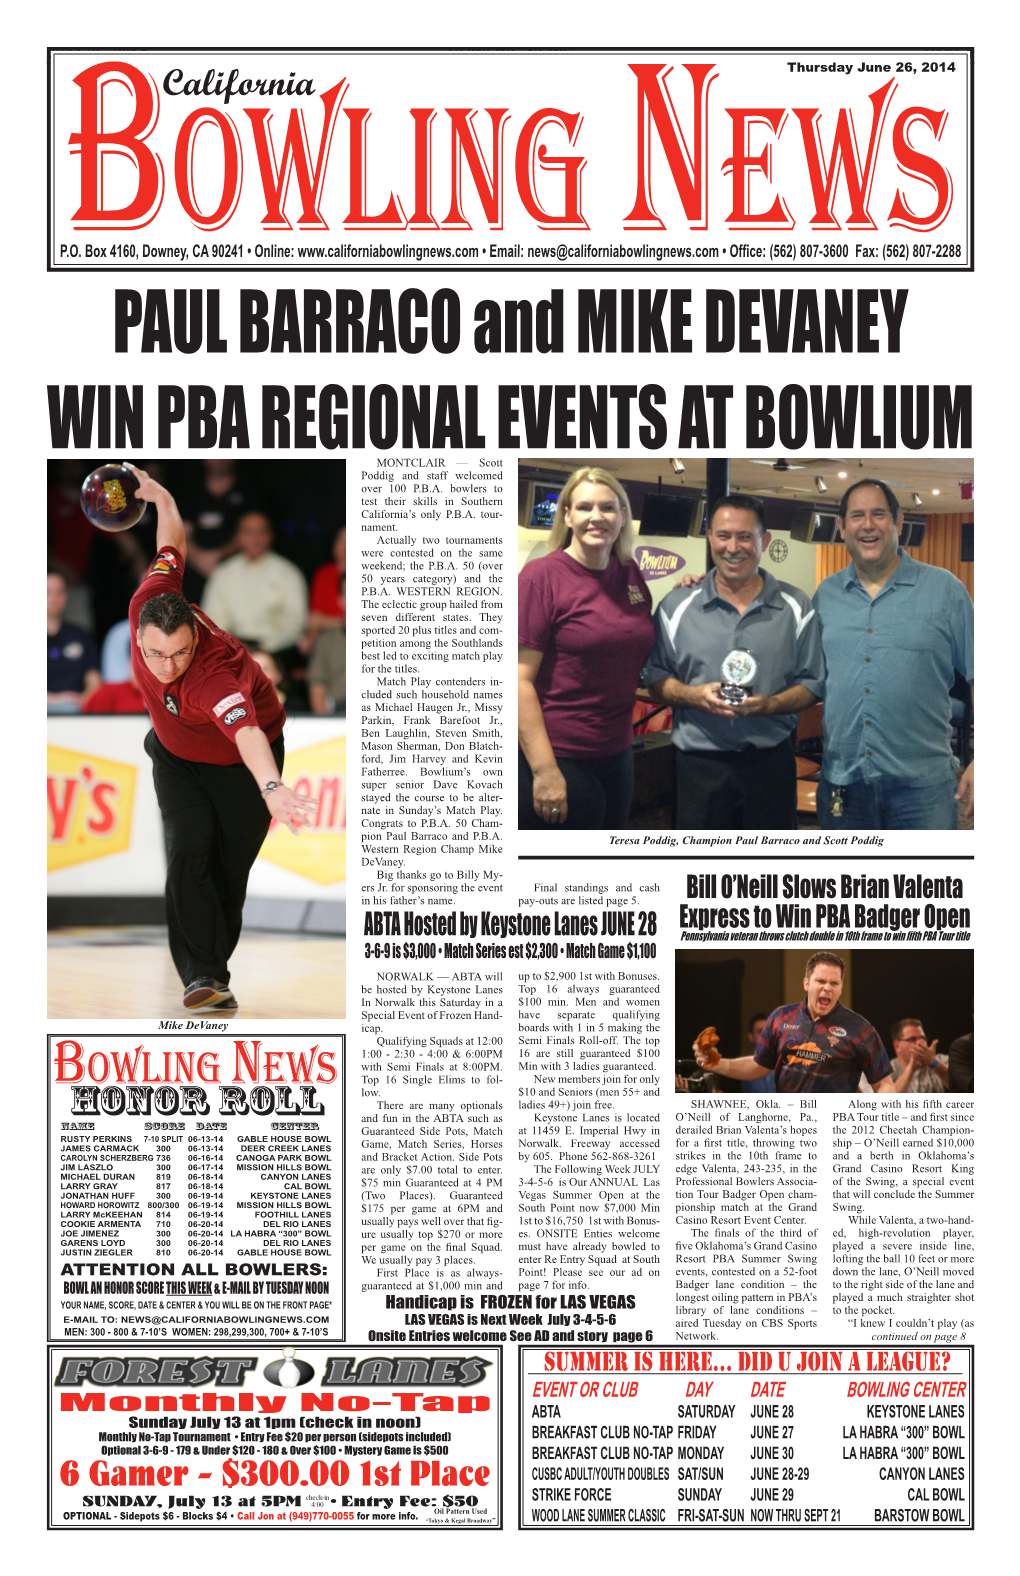 Paul Barraco and Mike Devaney Win Pba Regional Events at Bowlium